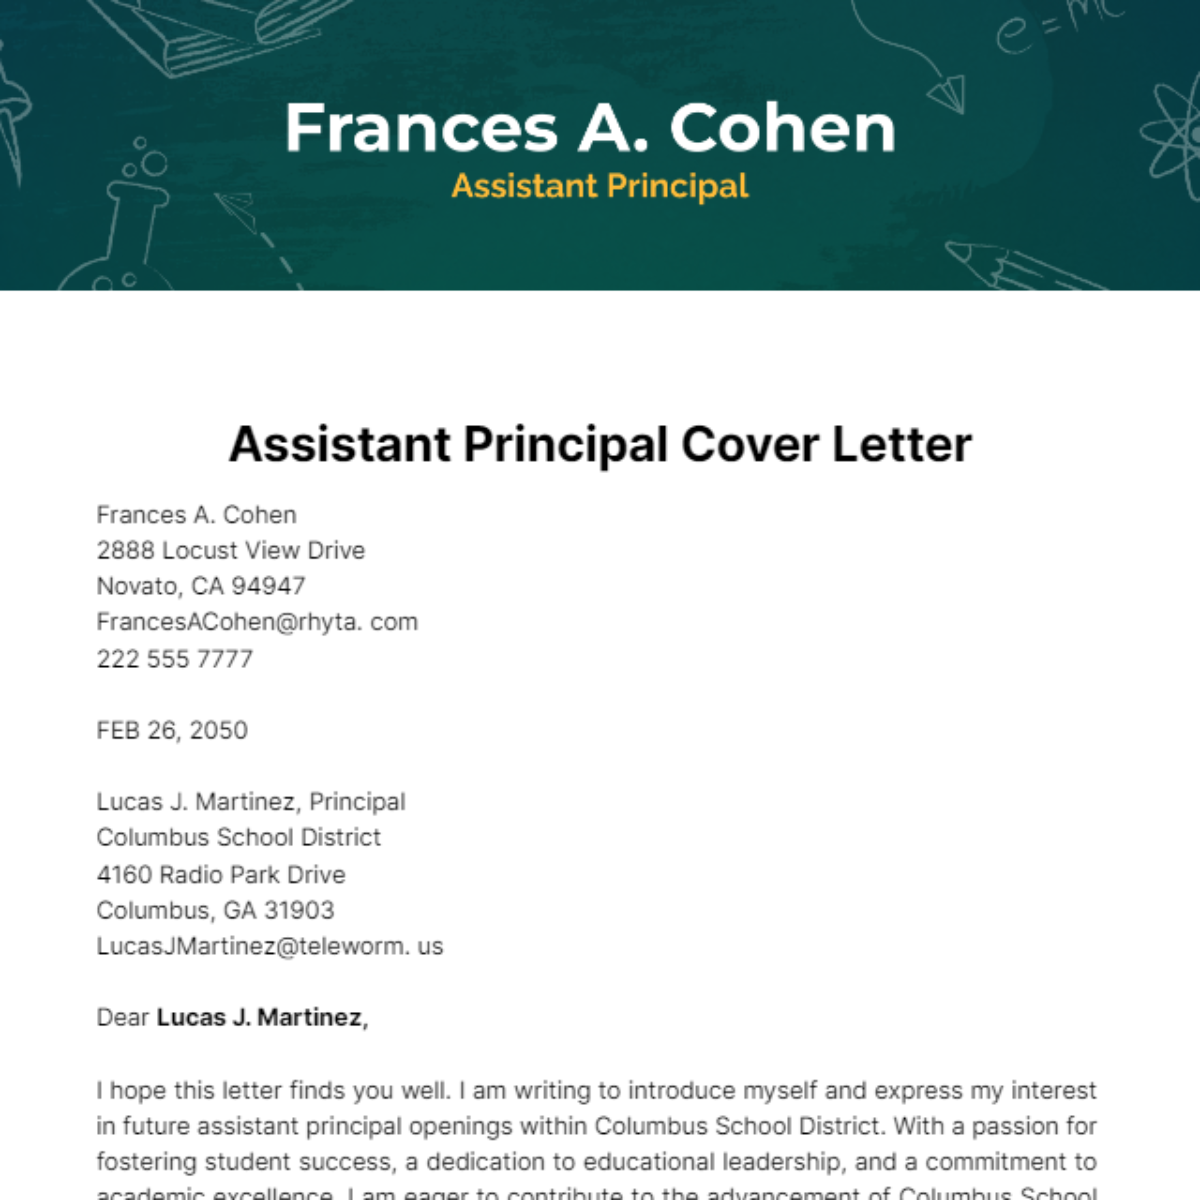 Assistant Principal Cover Letter Template